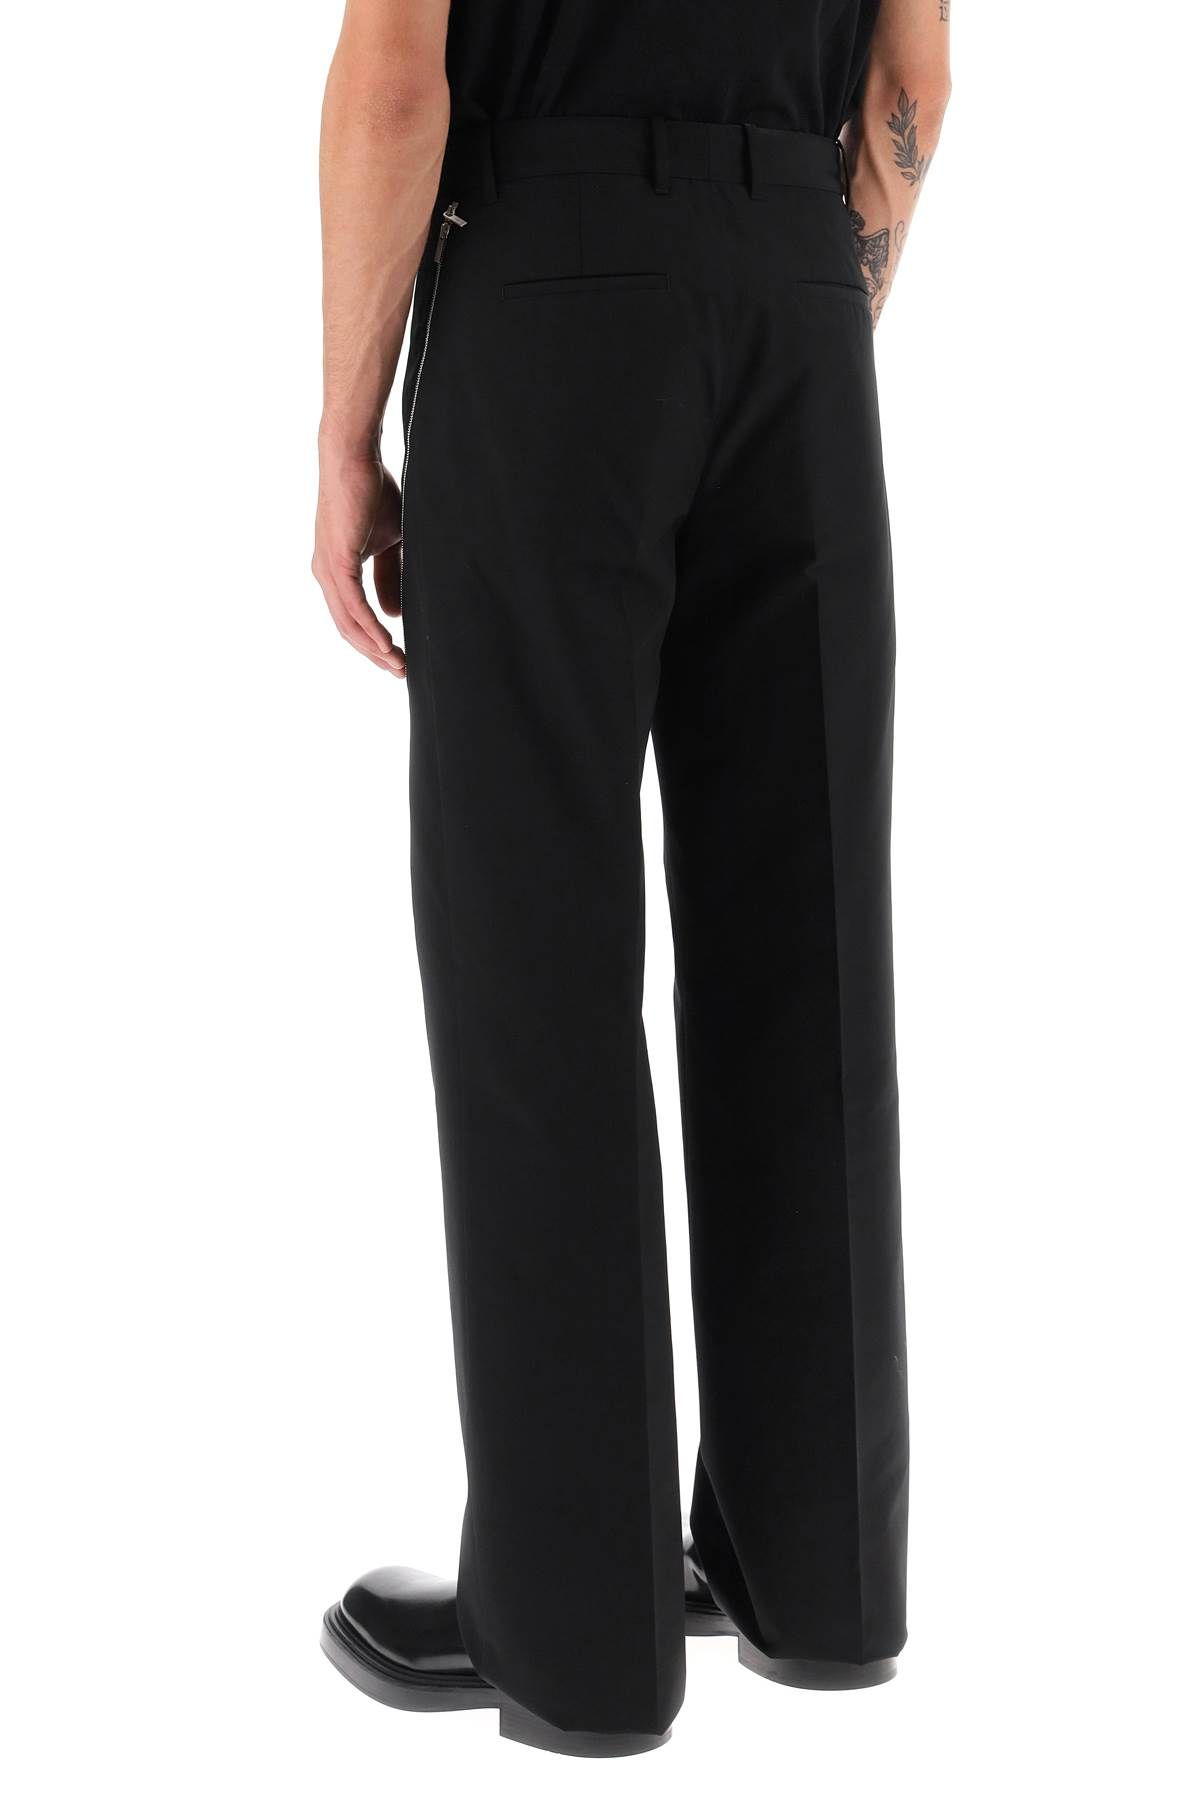 Shop Ferragamo Pants With Contrasting Inserts In Black